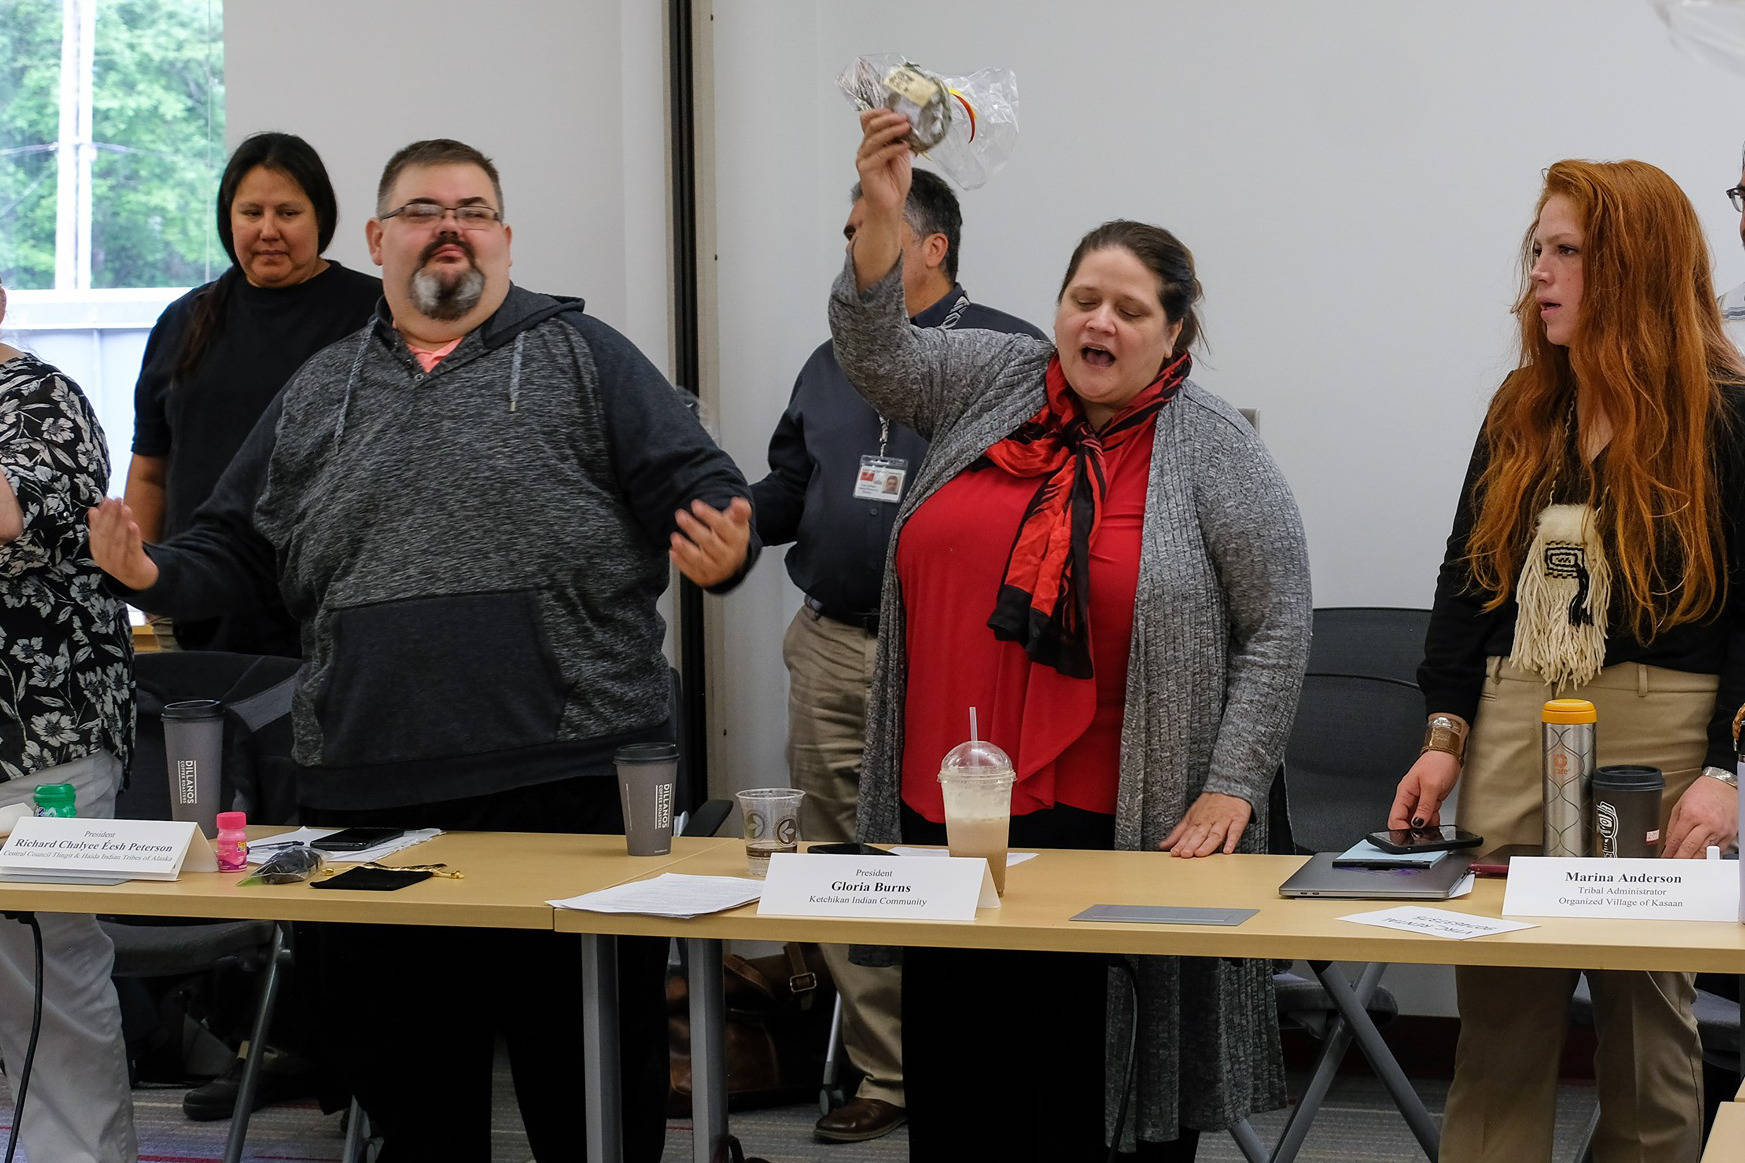 Tribal leaders from across the Southeast, including President Richard Chalyee Éesh Peterson of Central Council of the Tlingit and Haida Indian Tribes of Alaska, left; President Gloria Burns of the Ketchikan Indian Community, center; and Marina Anderson, Tribal Adminitrator of the Organized Village of Kaasan, right; and many others attended a consultation with officials from the U.S. Department of Agriculture and the U.S. Forest Service last week to meet and set the ground for replacing protections for the Tongass National Forest. (Courtesy photo / CCTHITA)